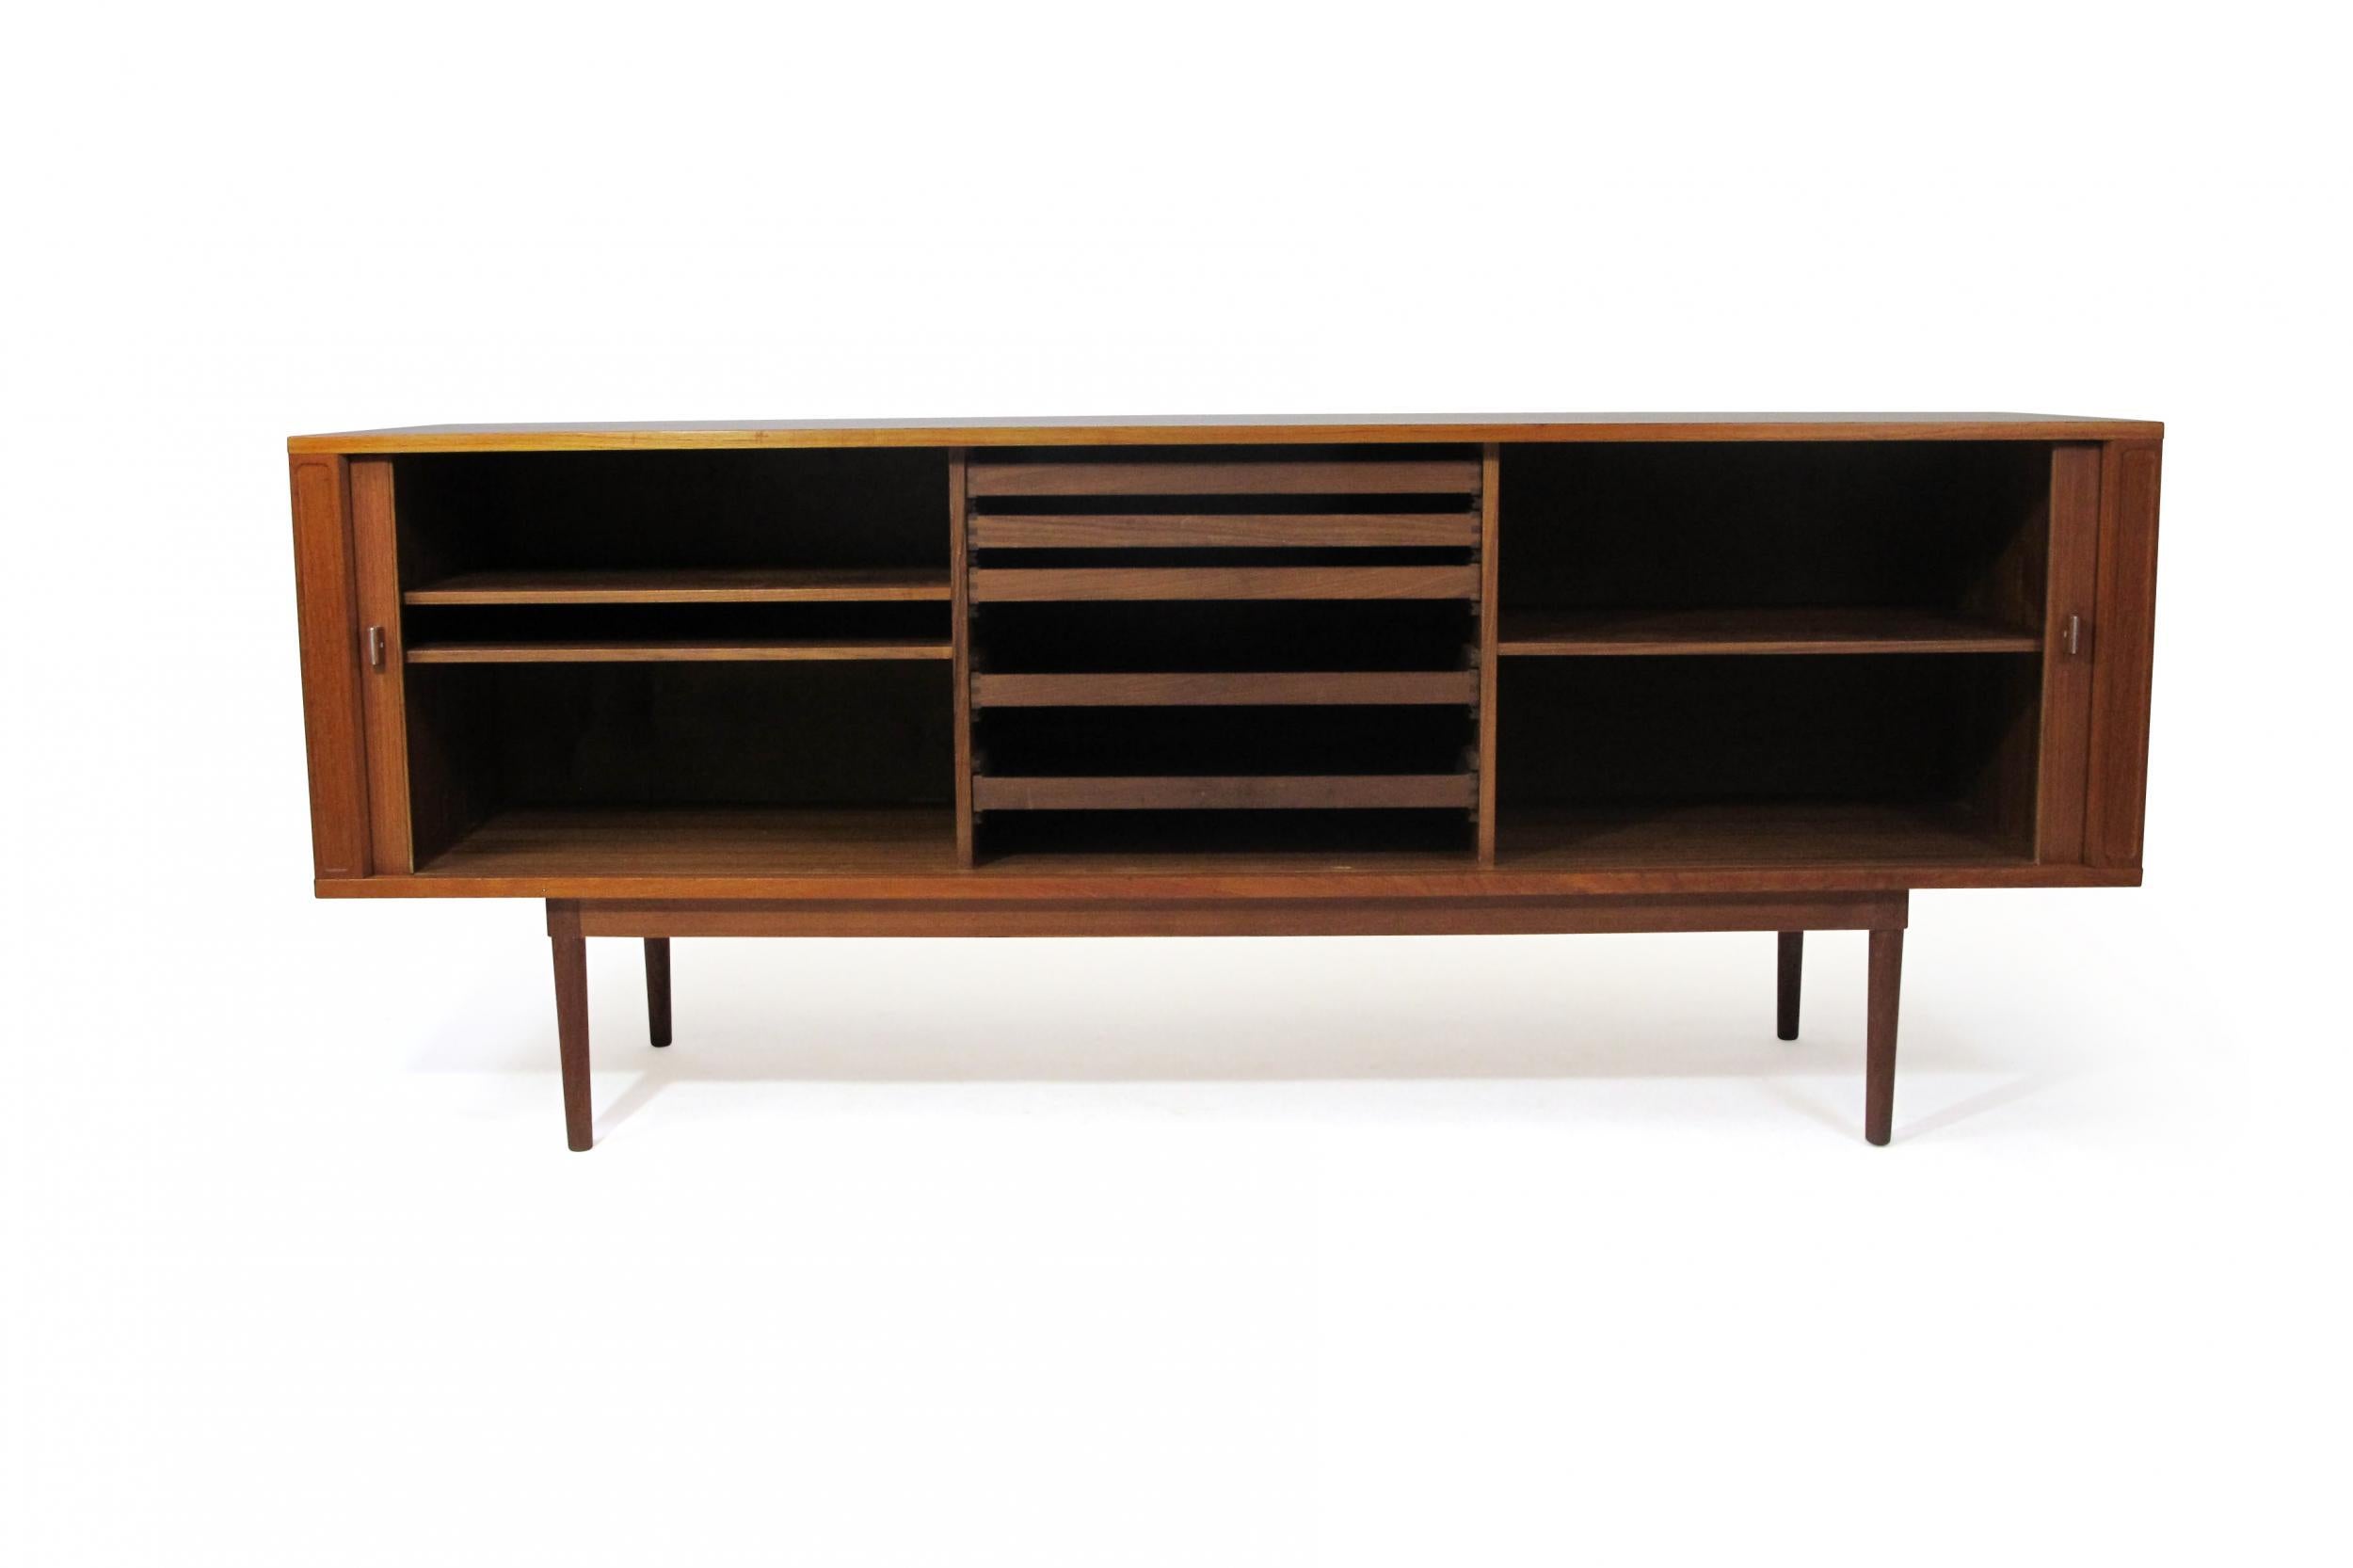 Teak credenza designed by Jens Quistgaard for Peter Lovig, Denmark, c.1960. The sideboard is crafted of teak with a book-matched tambour door front, which opens to reveal a series of adjustable shelves and silverware drawers. Raised on round tapered